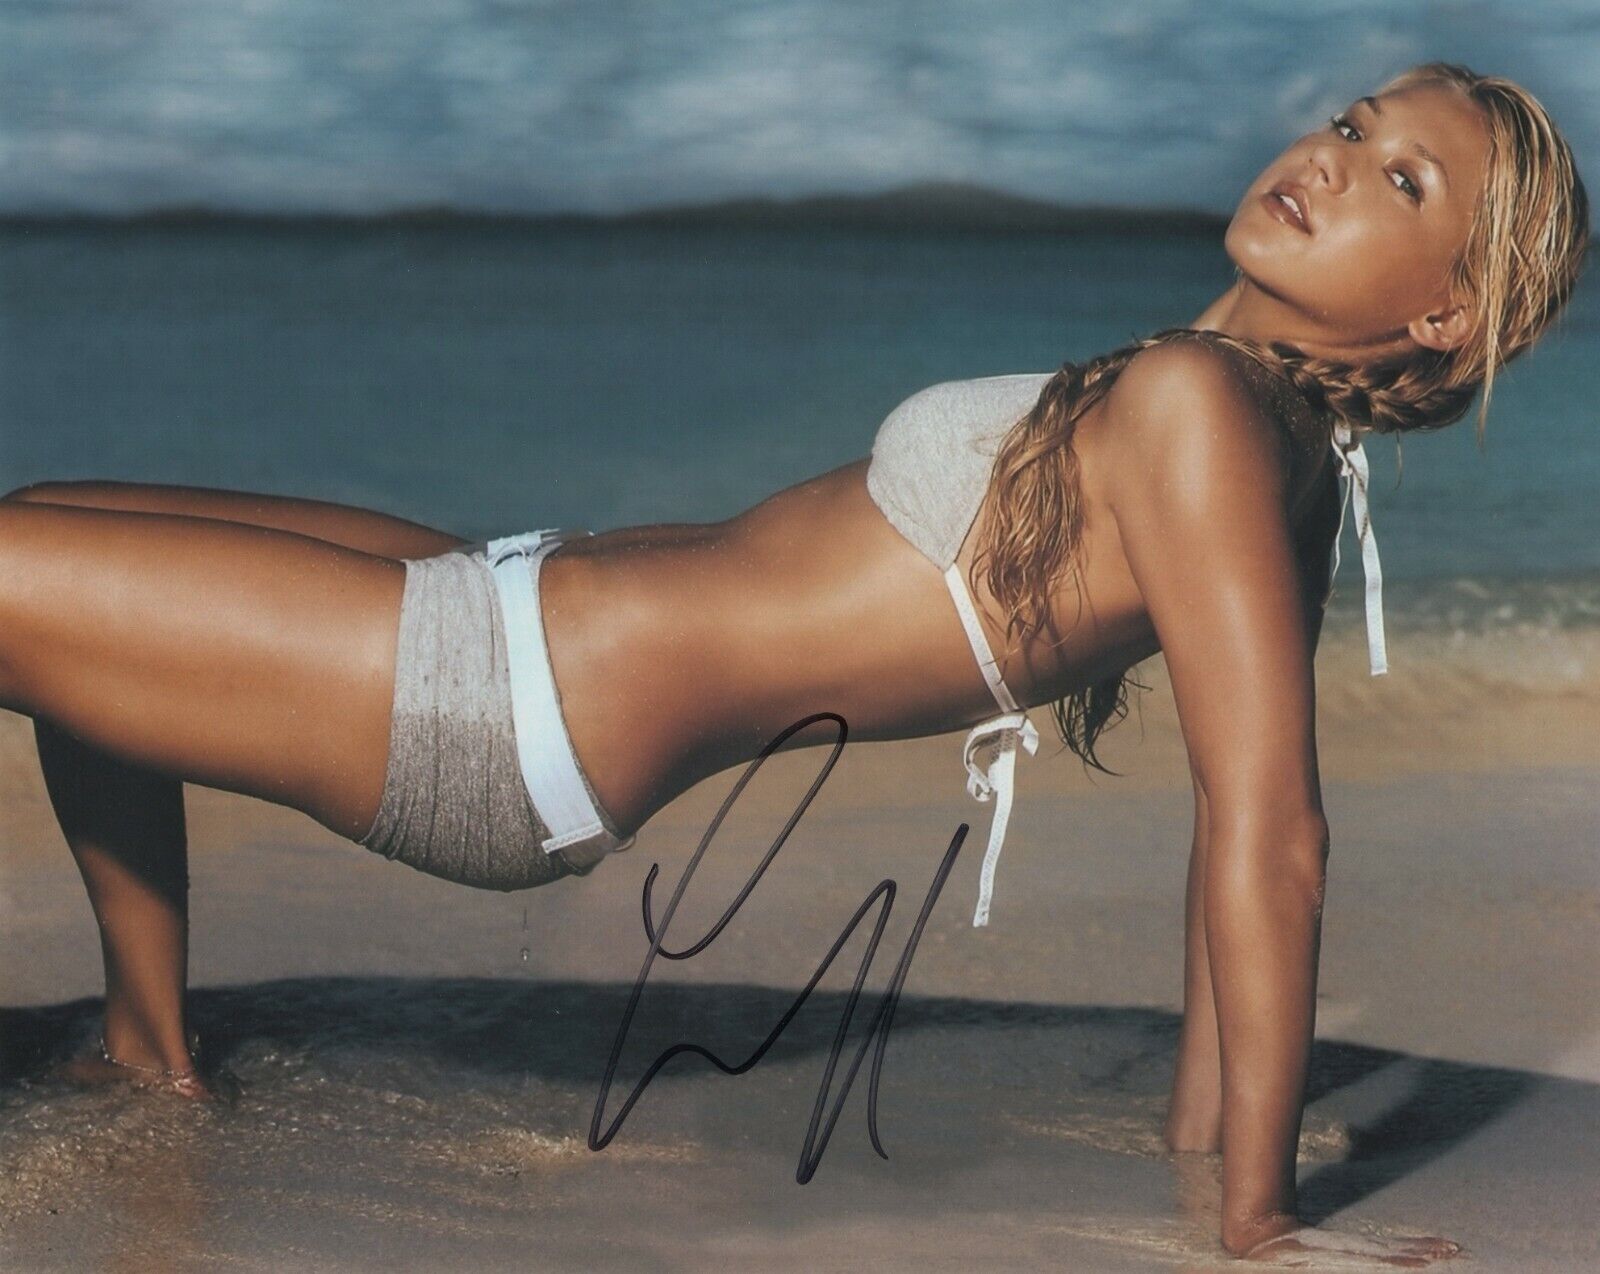 ANNA KOURNIKOVA SIGNED AUTOGRAPH SEXY HOT TENNIS 8X10 Photo Poster painting PROOF #3